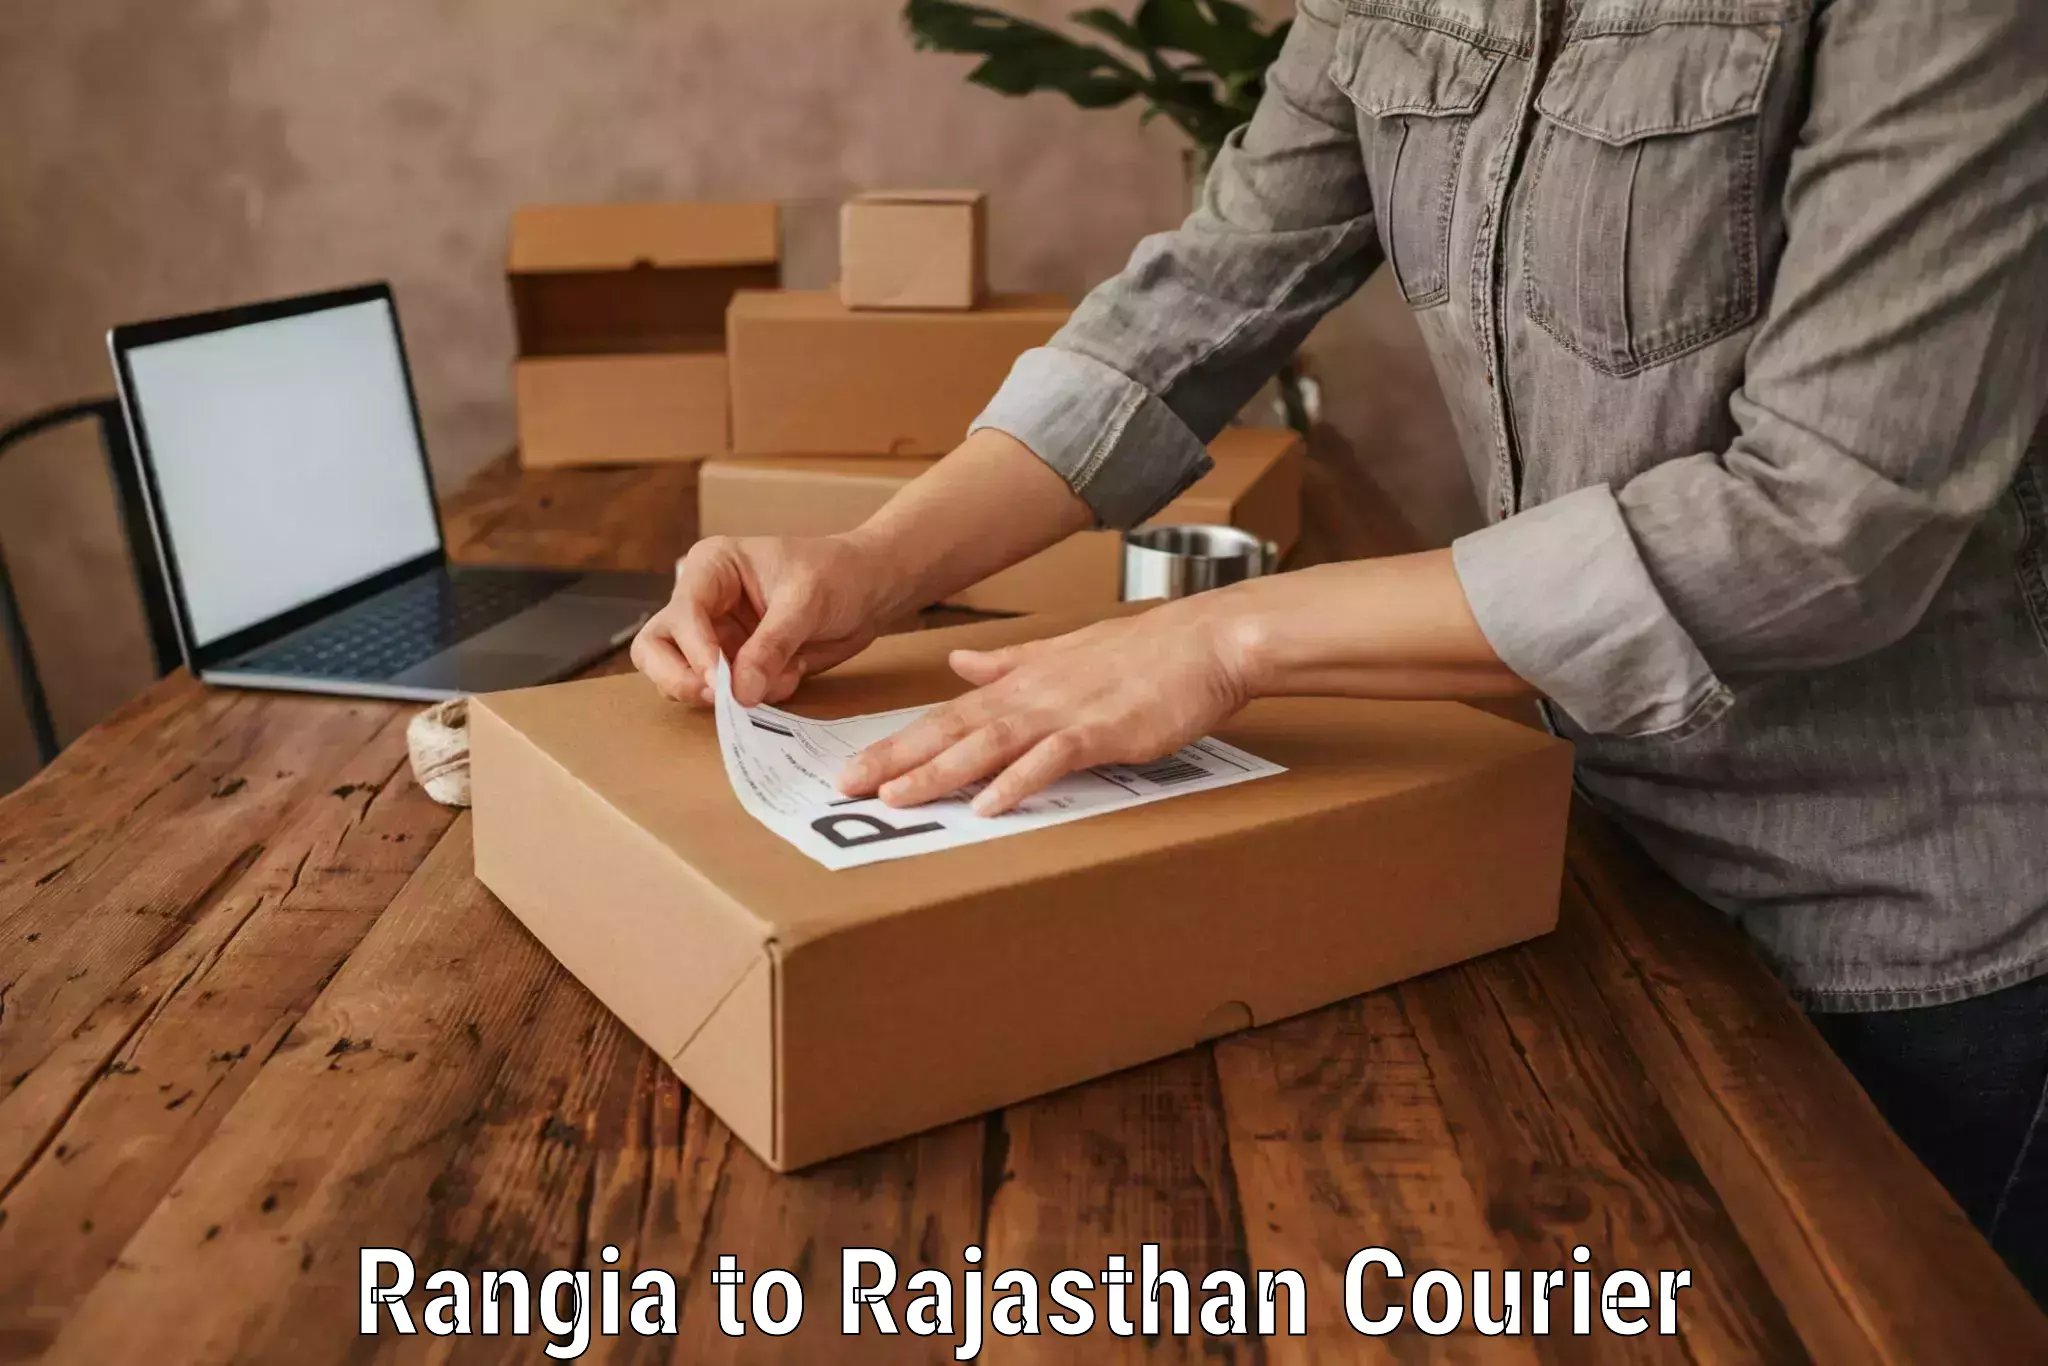 Luggage transport consultancy Rangia to Rajasthan